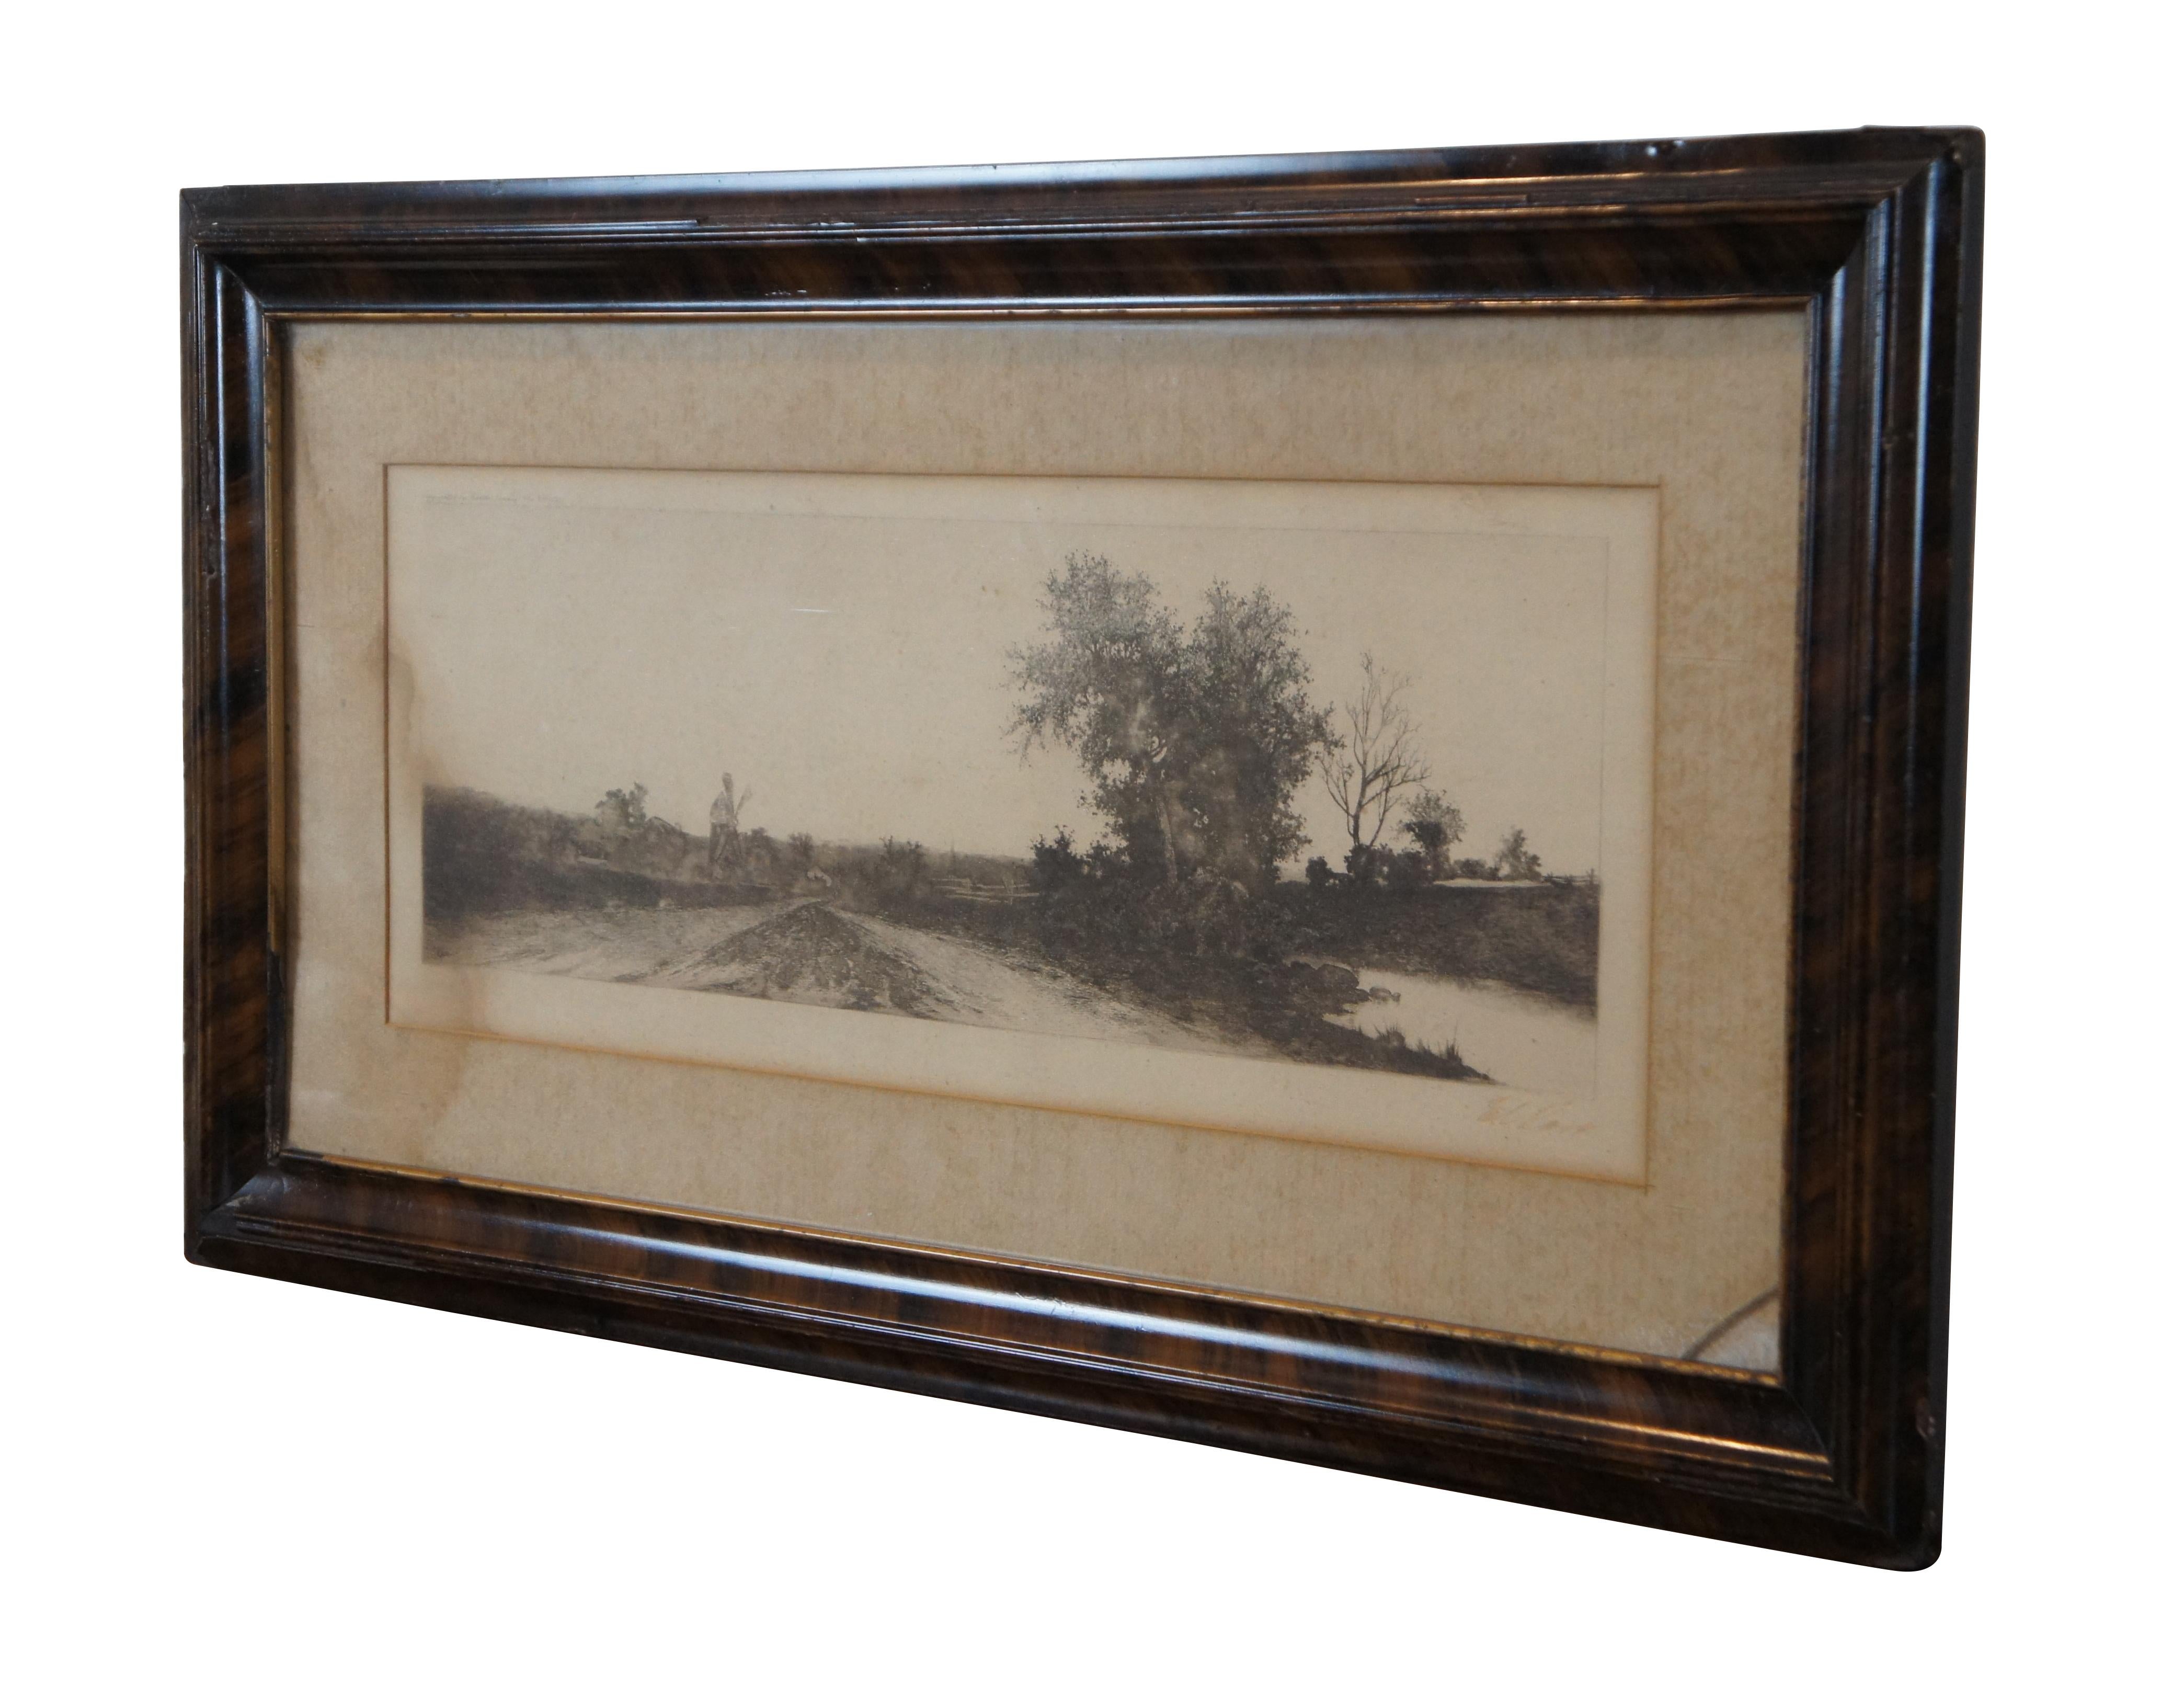 Late 19th century landscape etching by Ernest C. Rost, showing a country road flanked by fields, trees, and a windmill. Copyrighted by Radtke Lauckner & Co, New York, 1893. Signed in plate, lower left. Faded ink signature at lower right.

“ERNEST